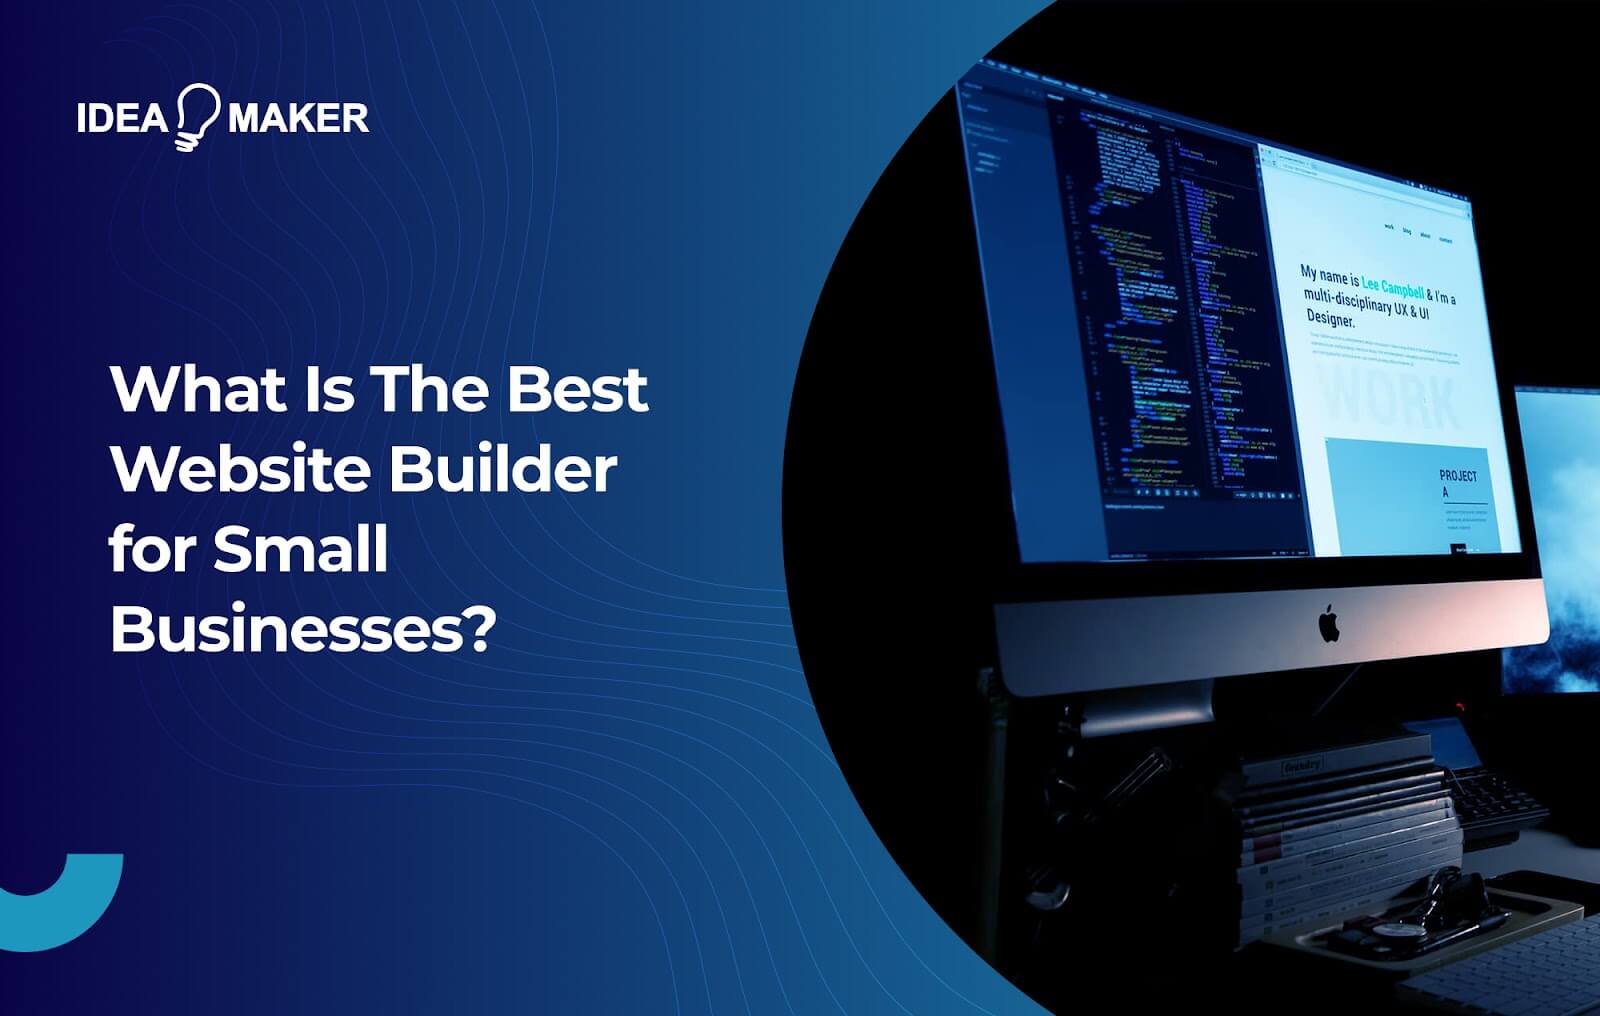 Ideamaker - What Is The Best Website Builder for Small Businesses